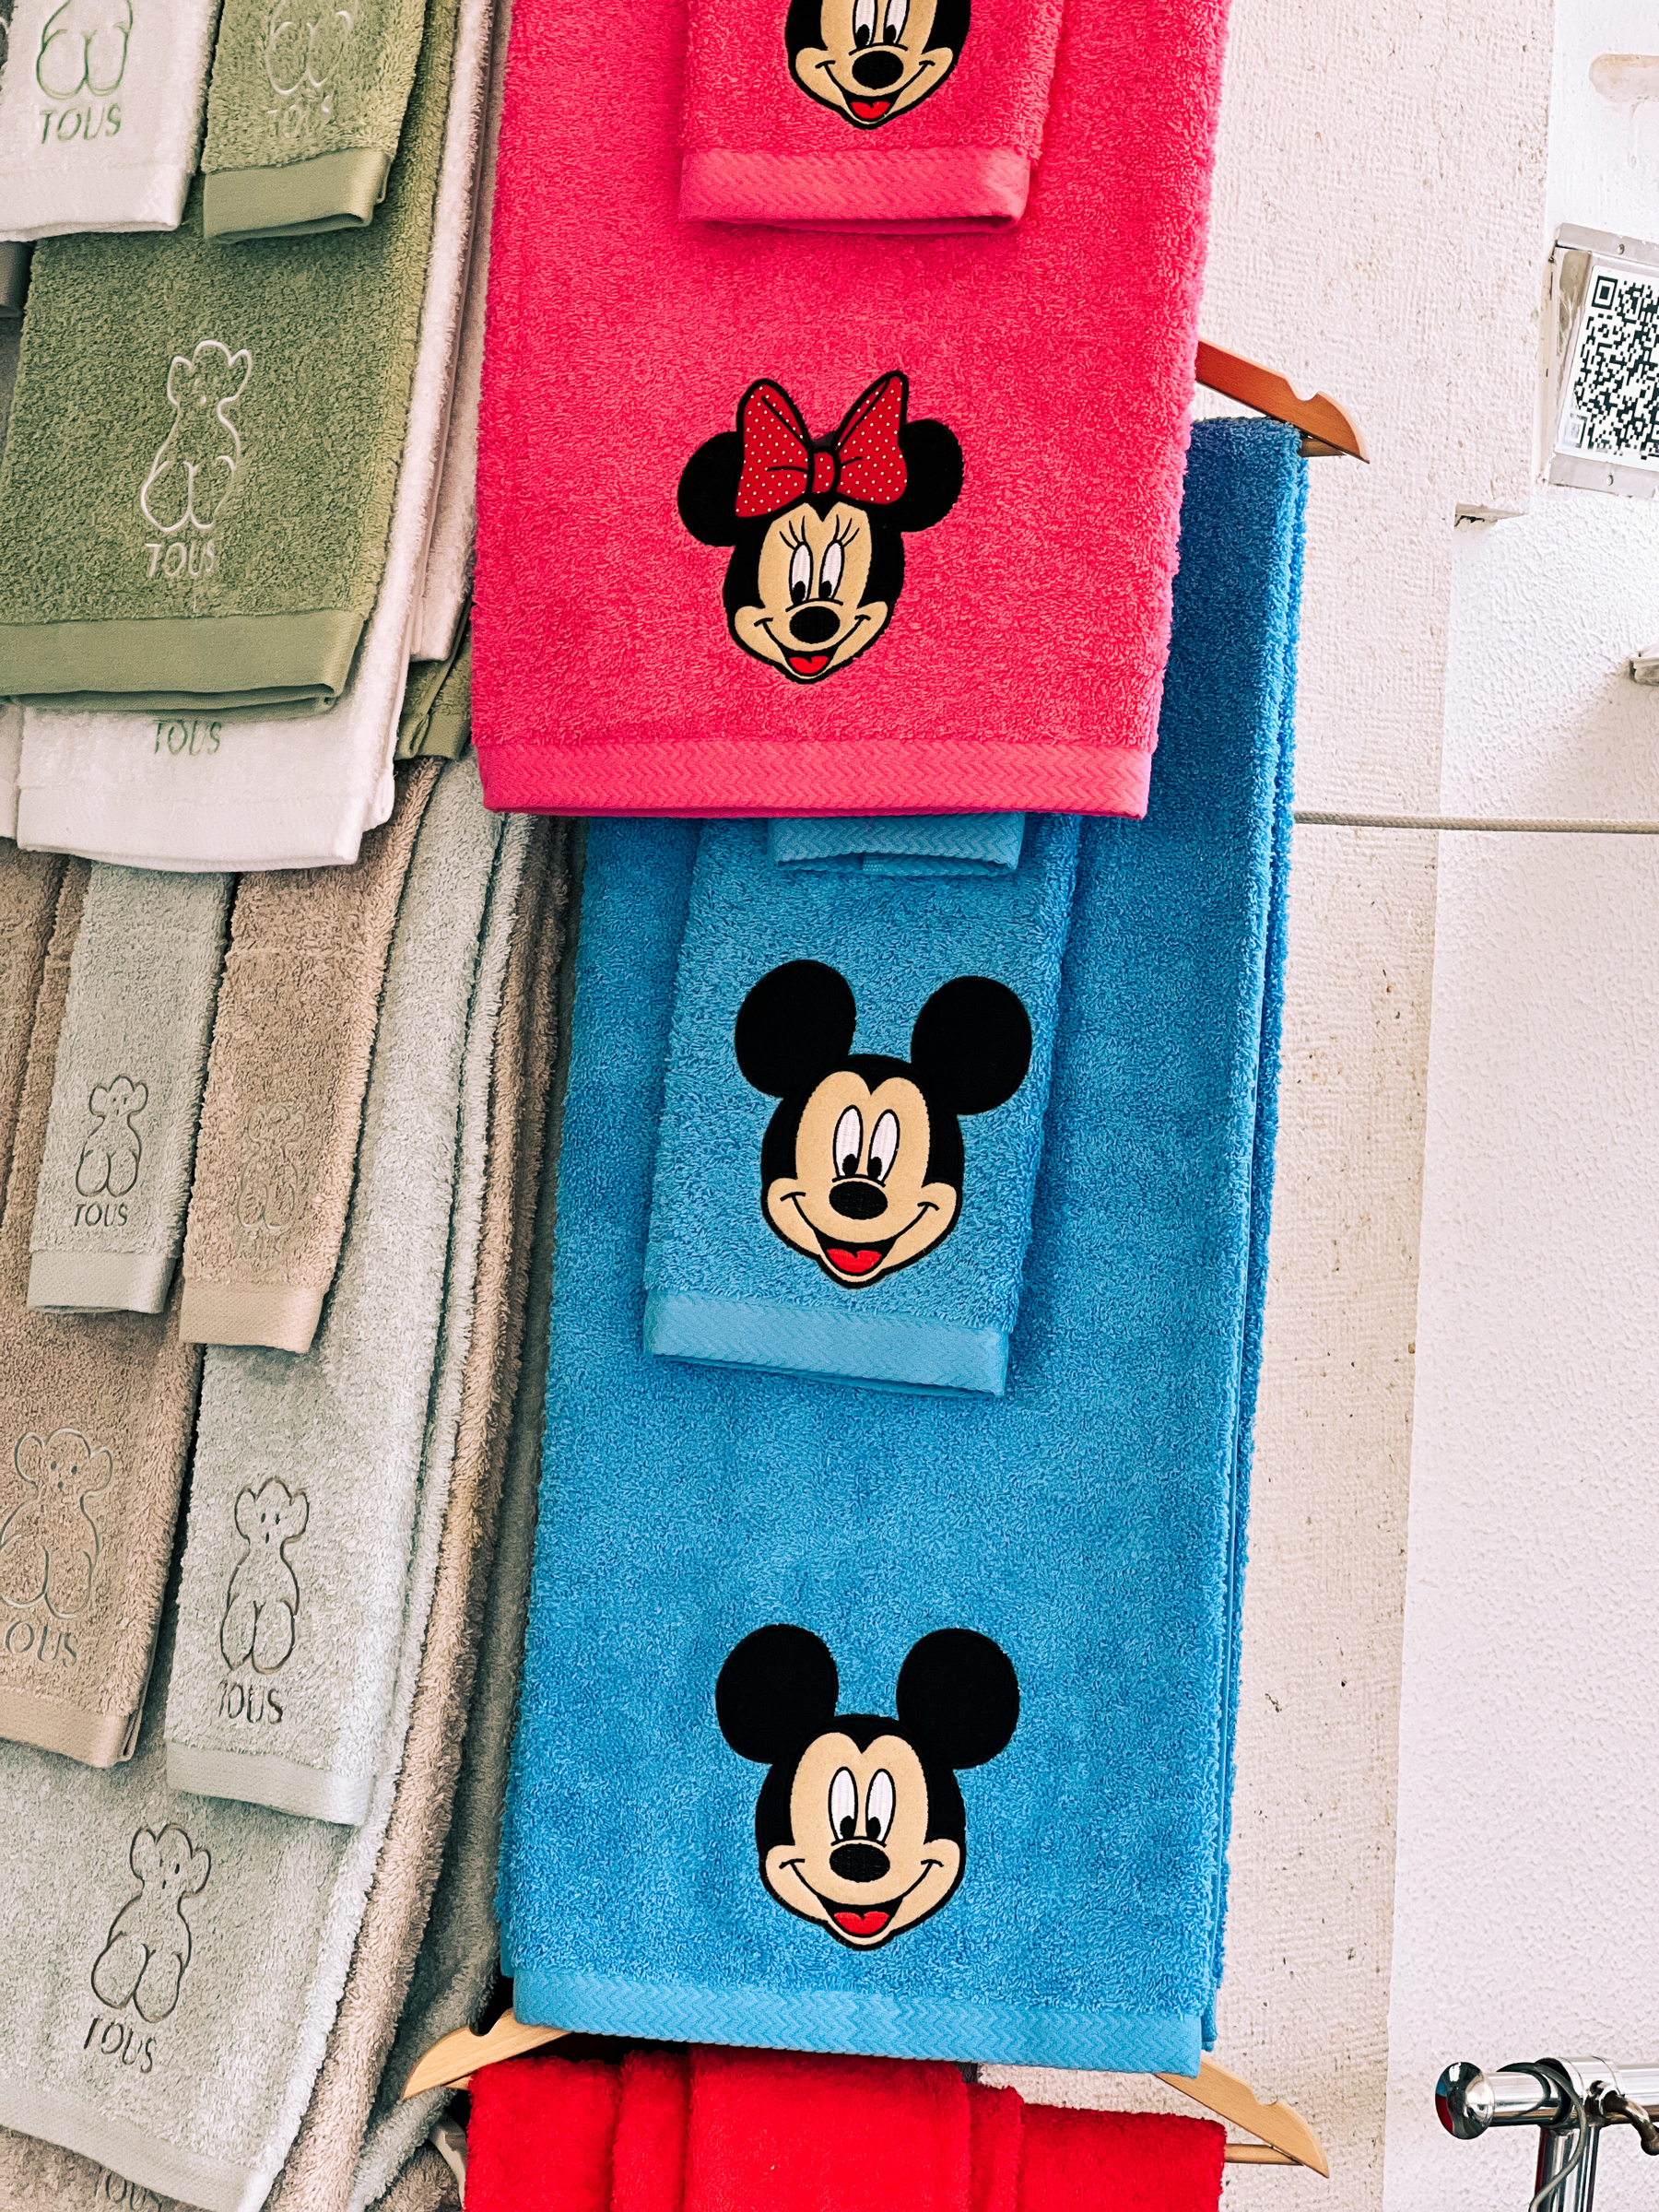 Towels on display, Mickey and Minnie embroidered on them. 